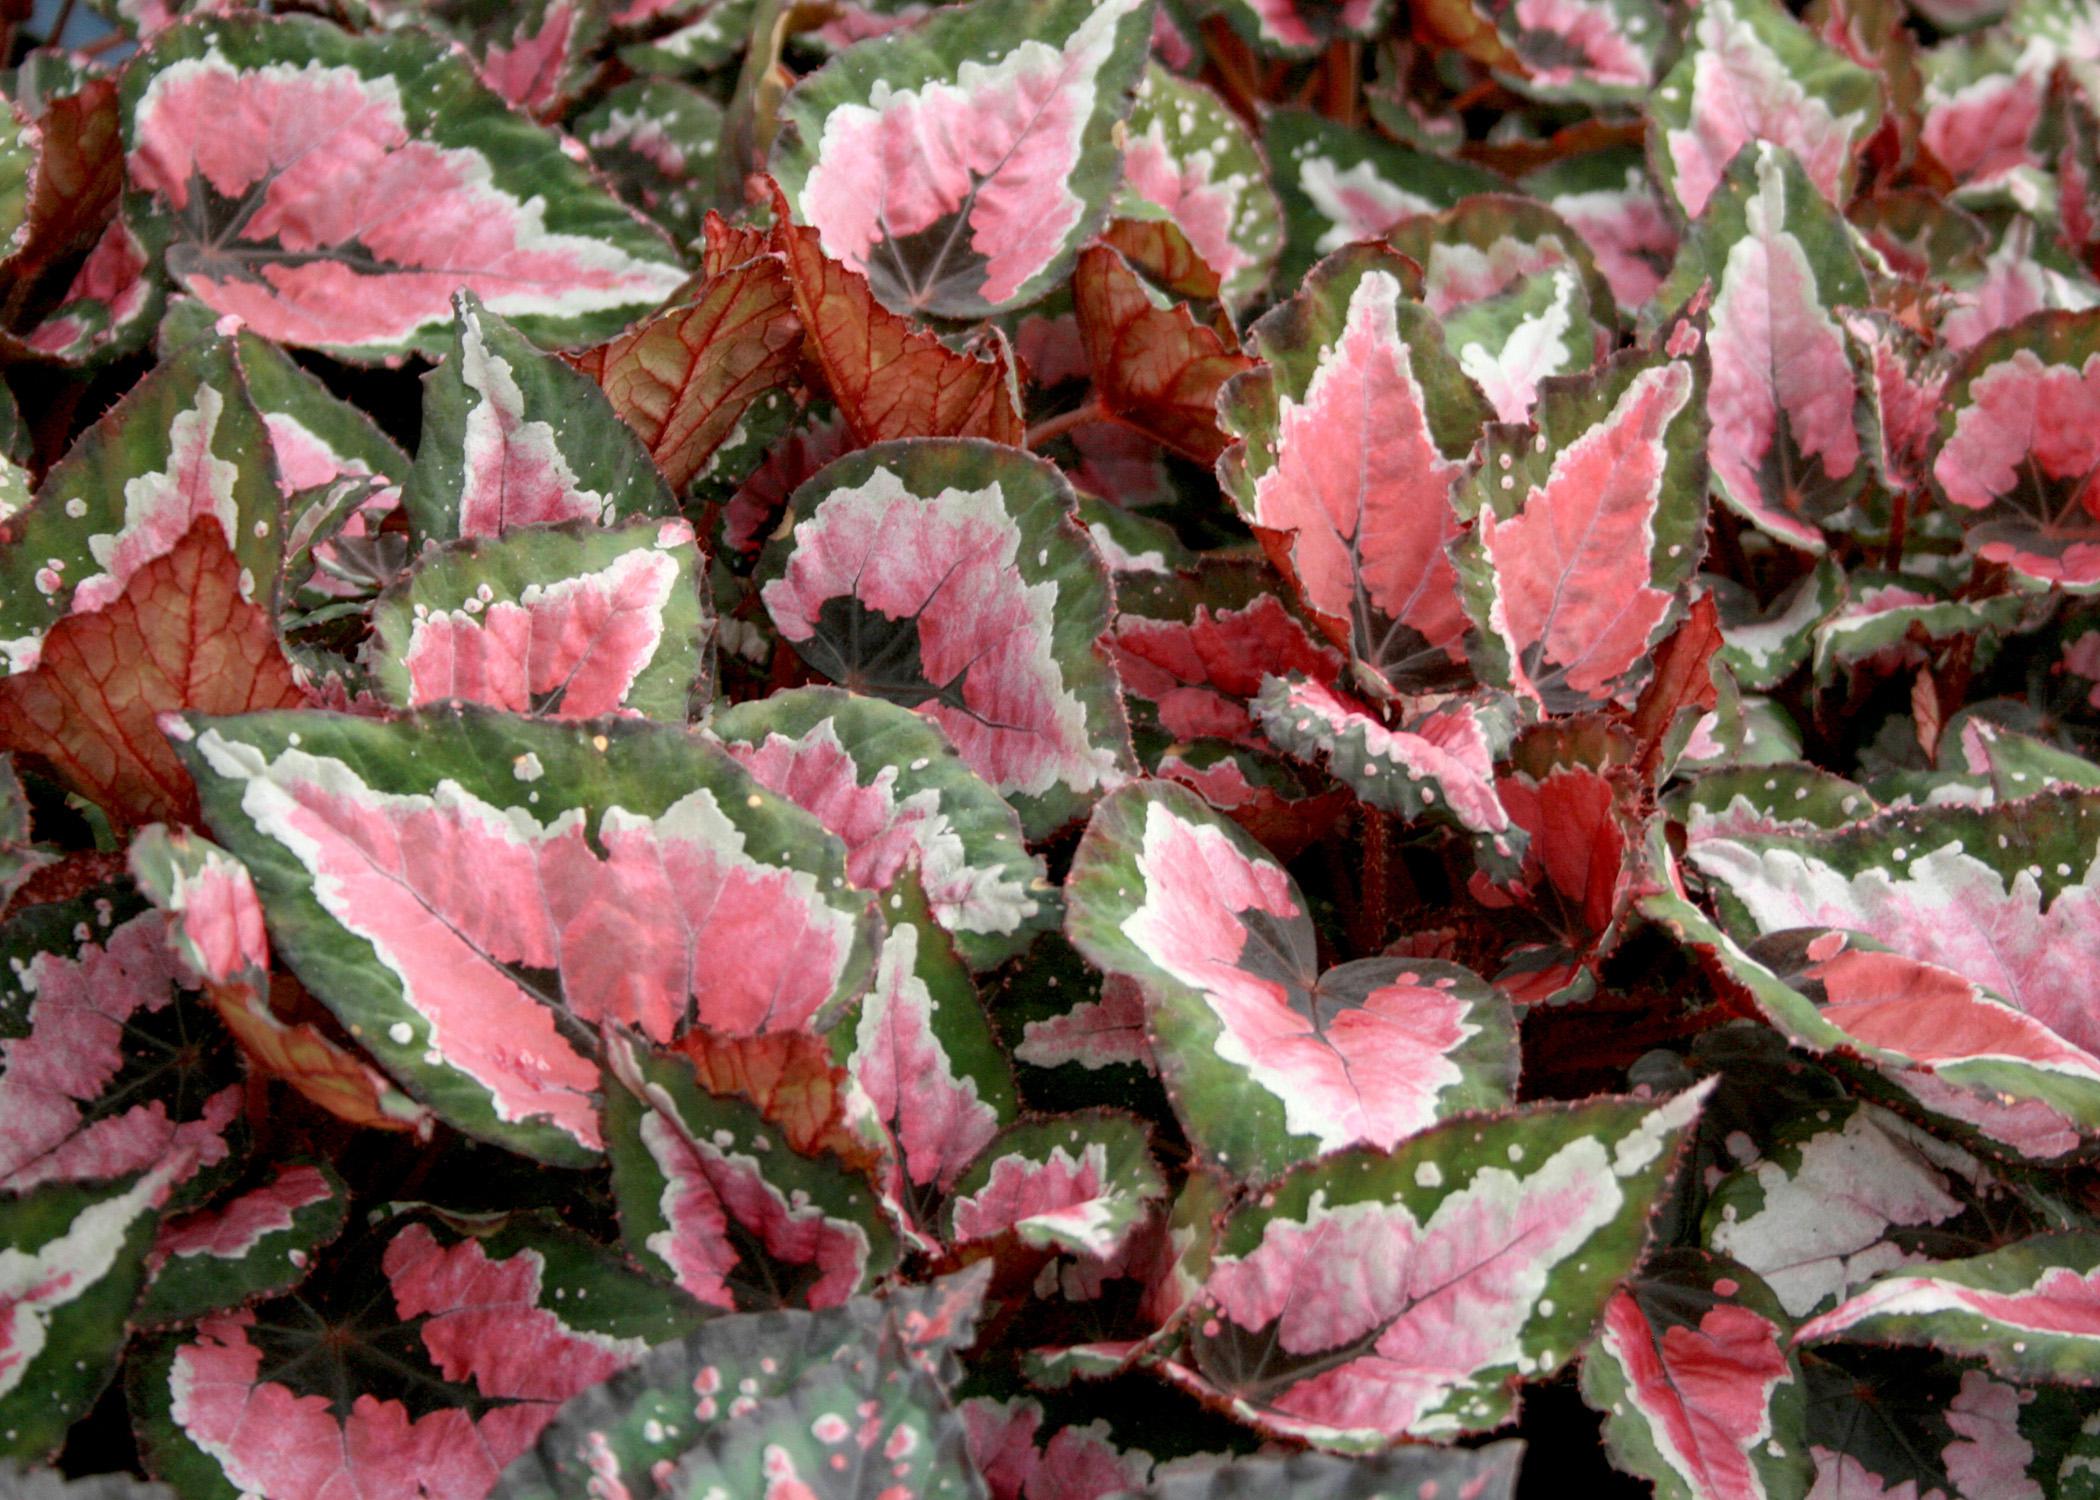 The Hilo Holiday Rex begonia has coarse-textured leaves with colorful streaks and splashes of silver, cream and burgundy. It has the potential to become a cornerstone of Christmas decorating. (Photo by MSU Extension Service/Gary Bachman)